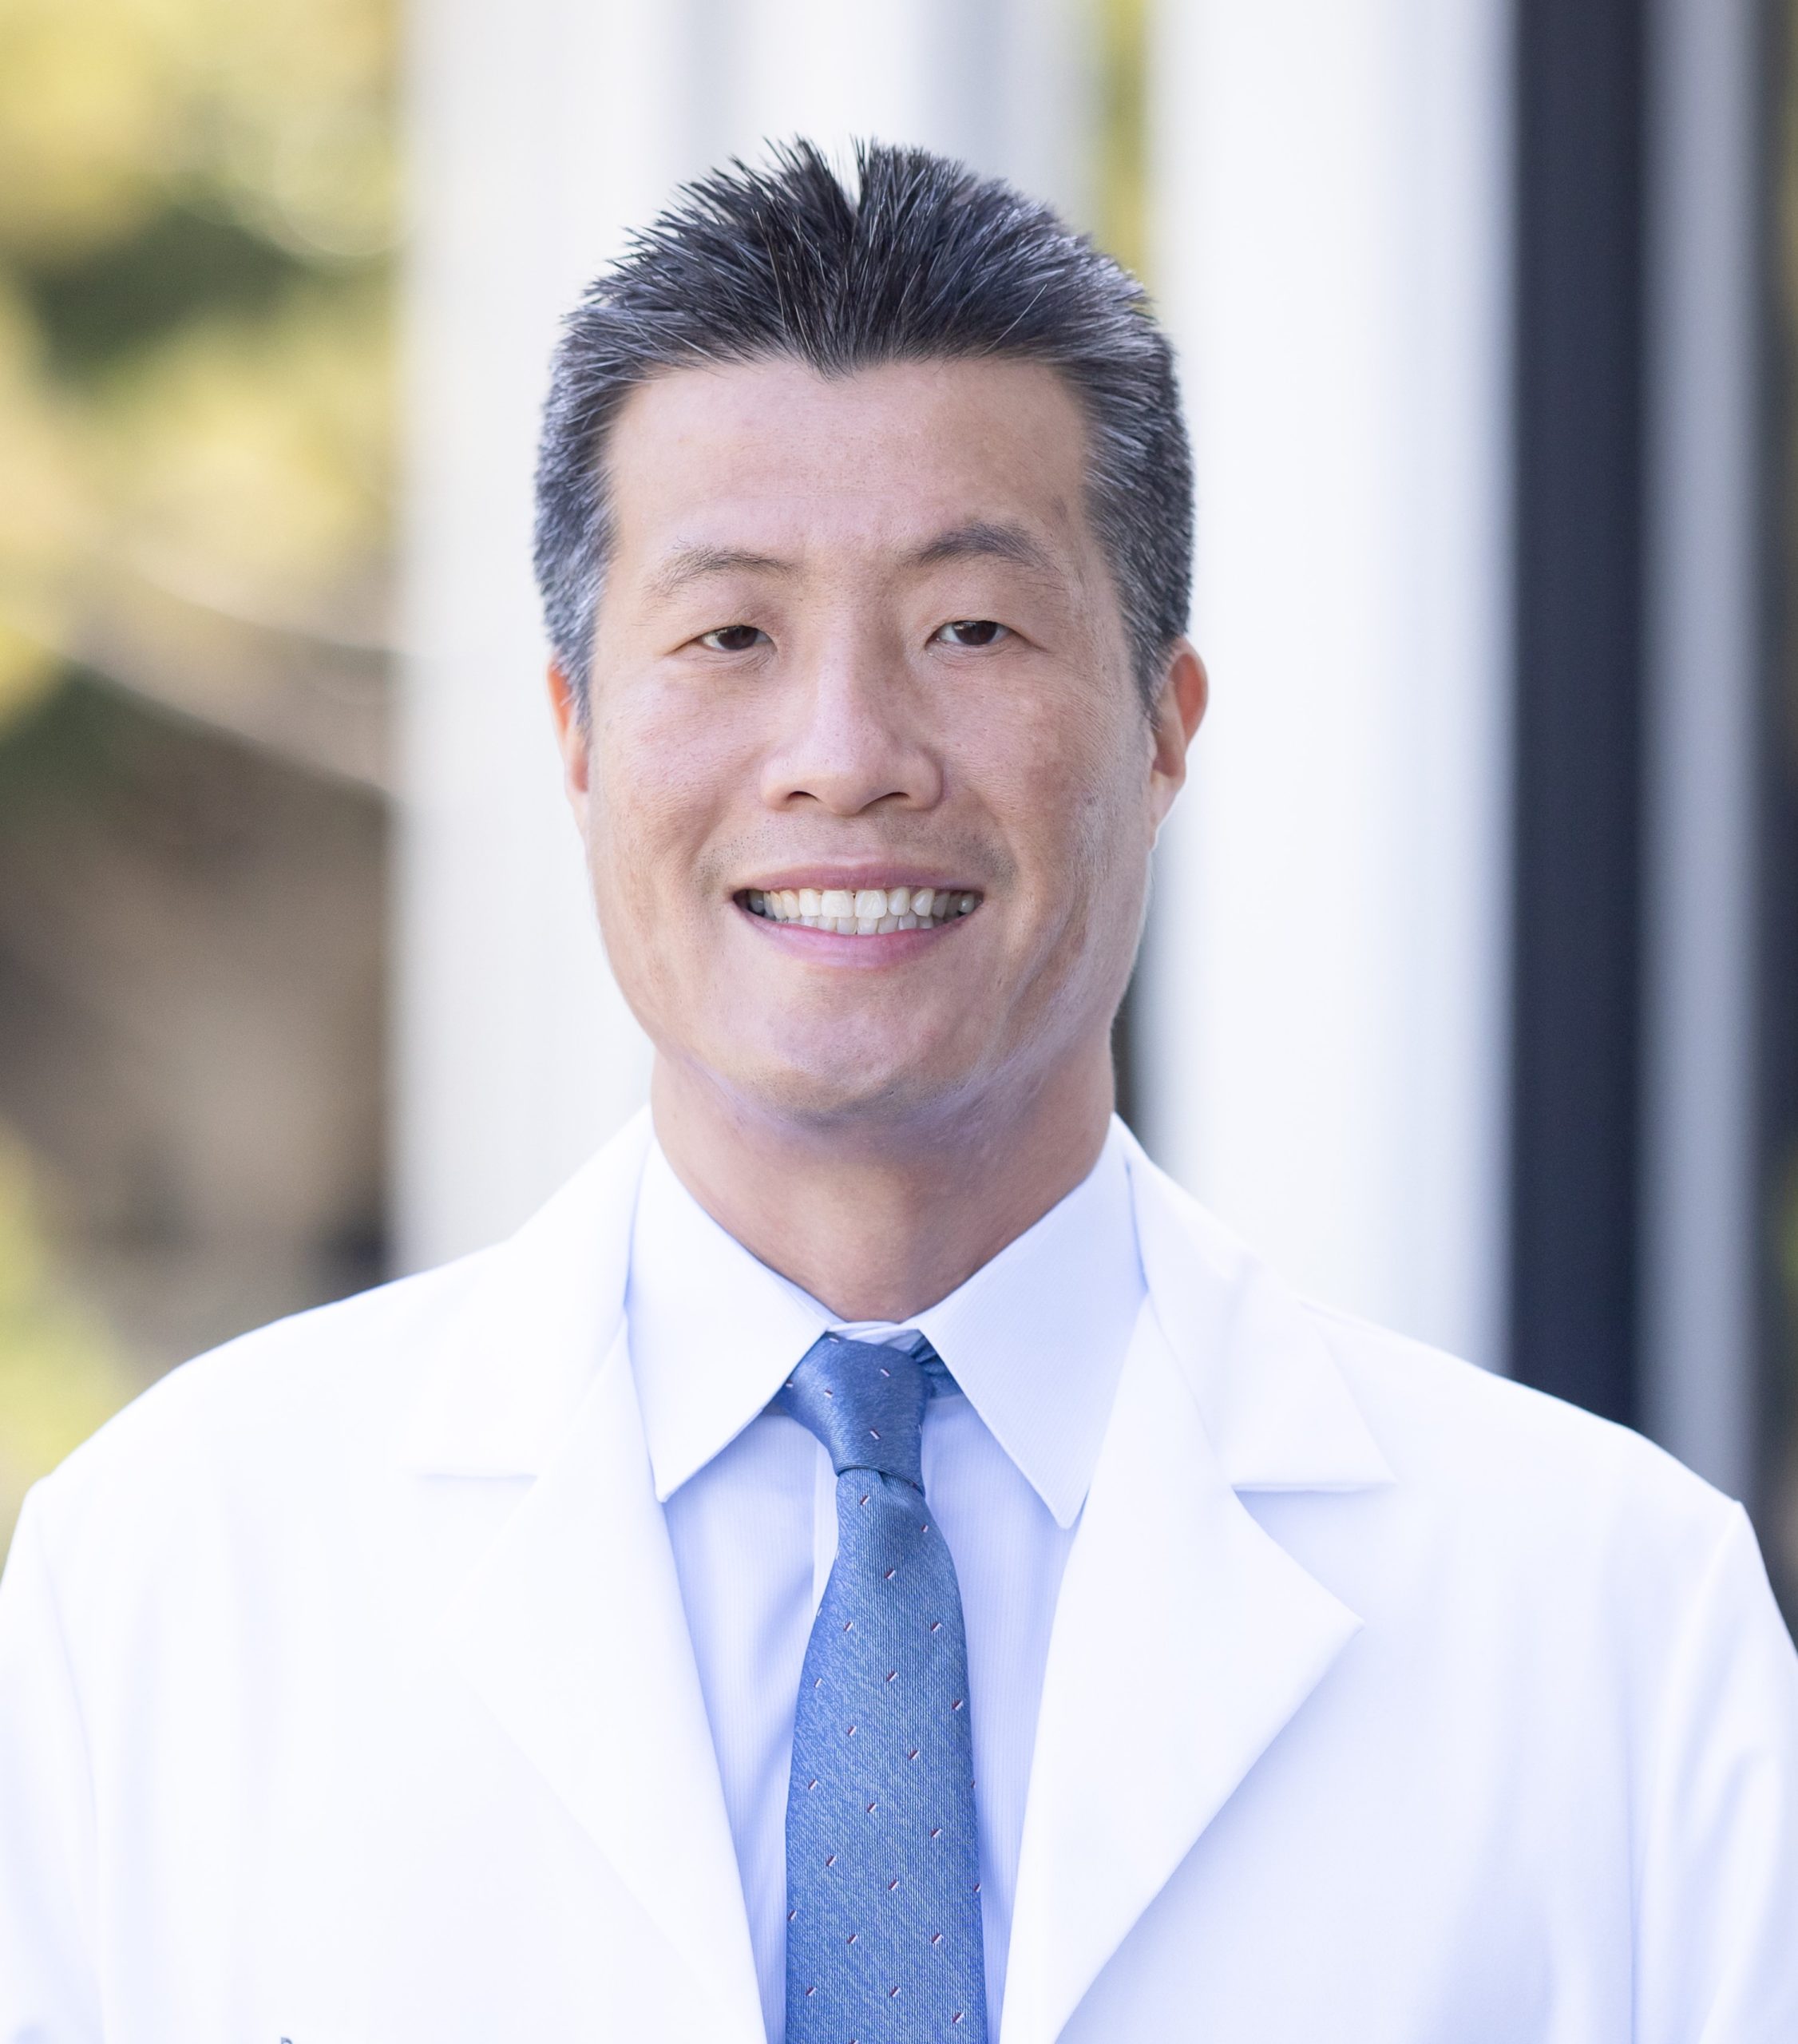 Percy Lee, MD